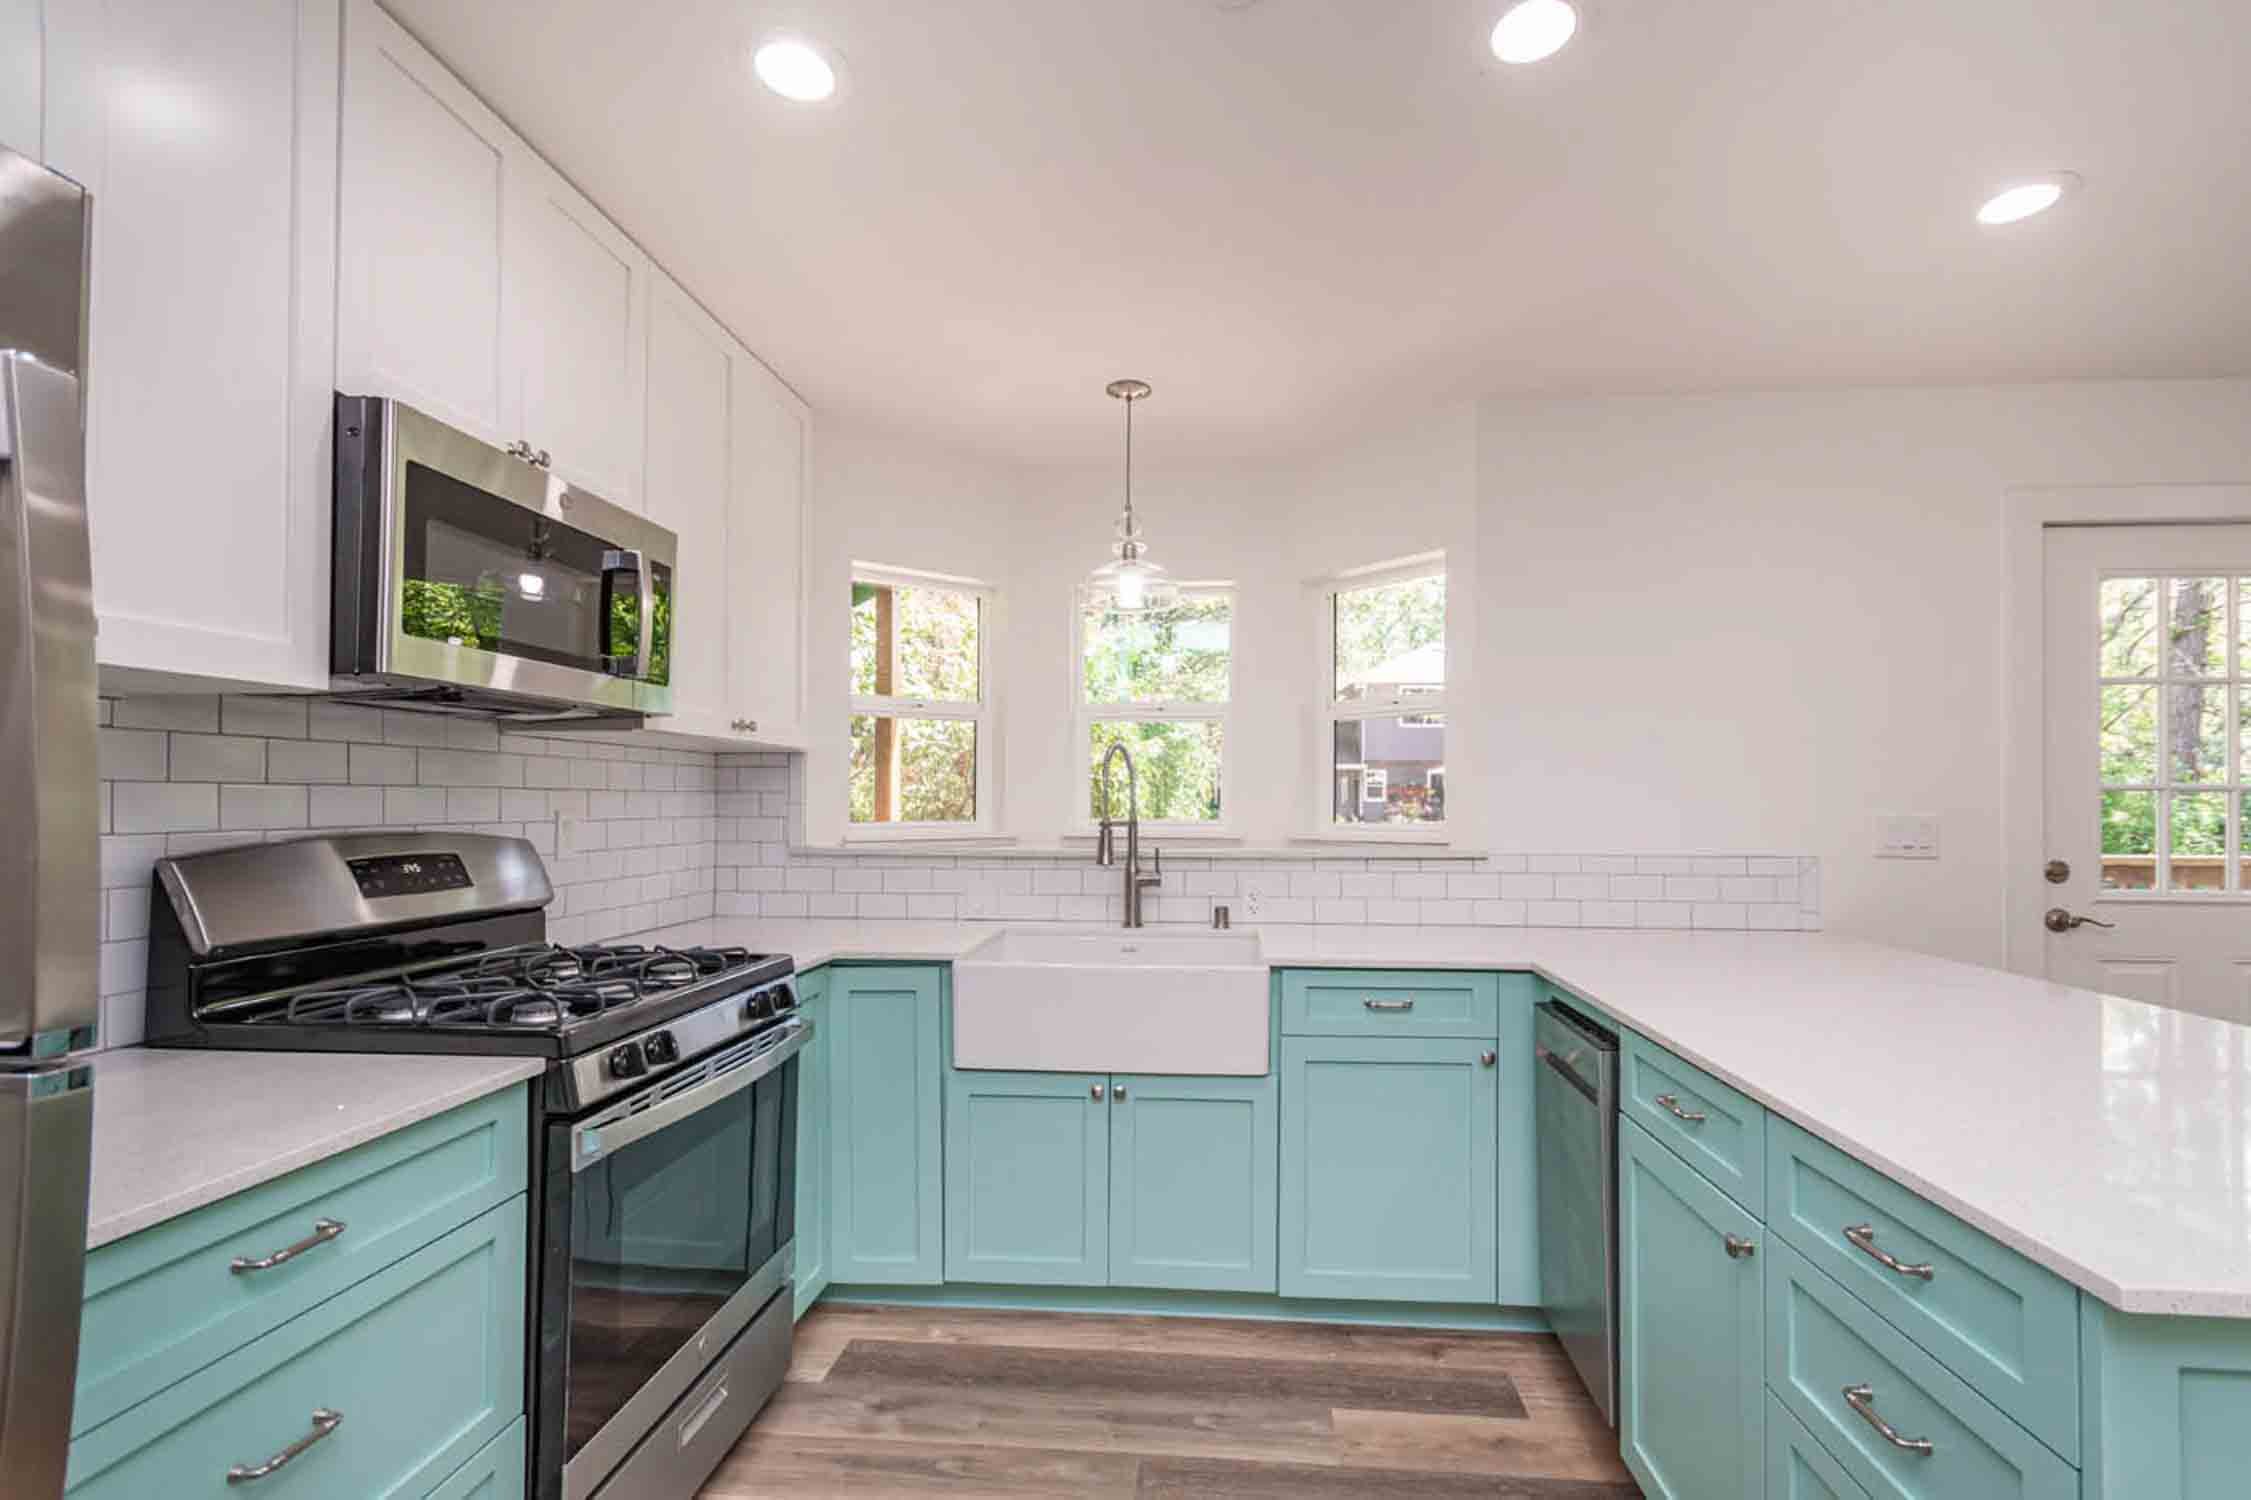 Jacksonville tiny house companies and their project of a mint green kitchen in a home.